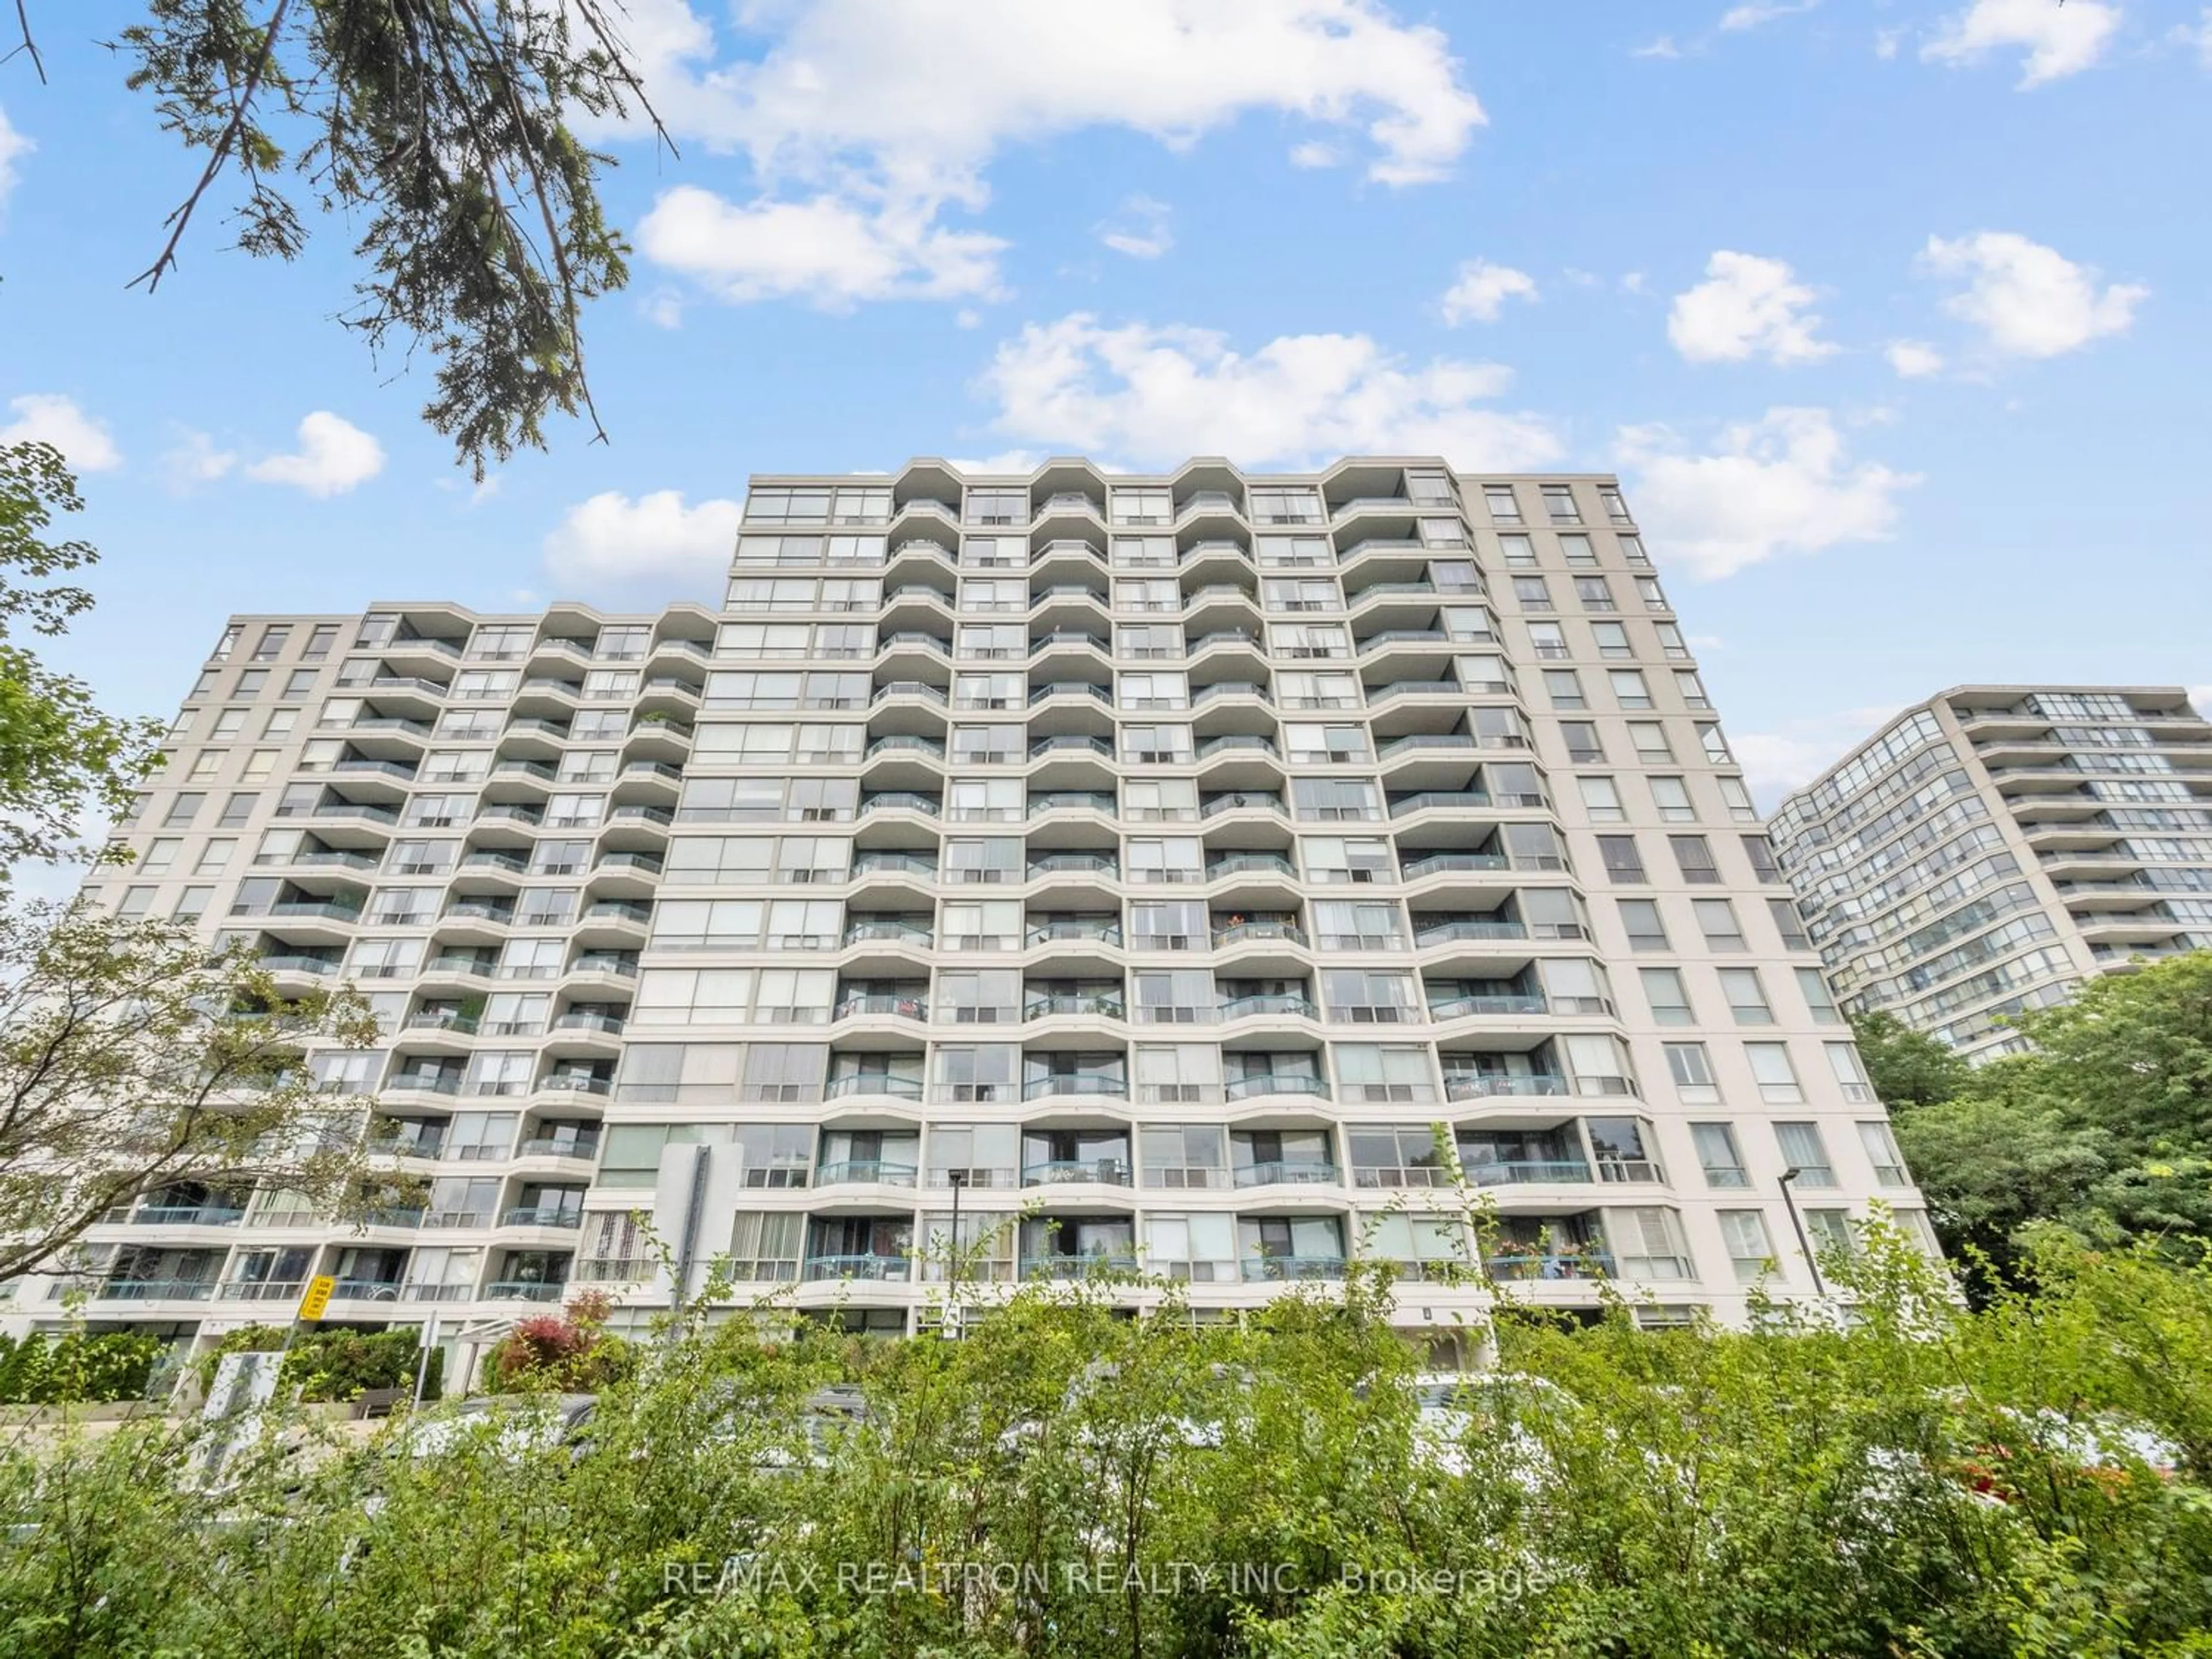 A pic from exterior of the house or condo for 4727 Sheppard Ave #1007, Toronto Ontario M1S 5B3